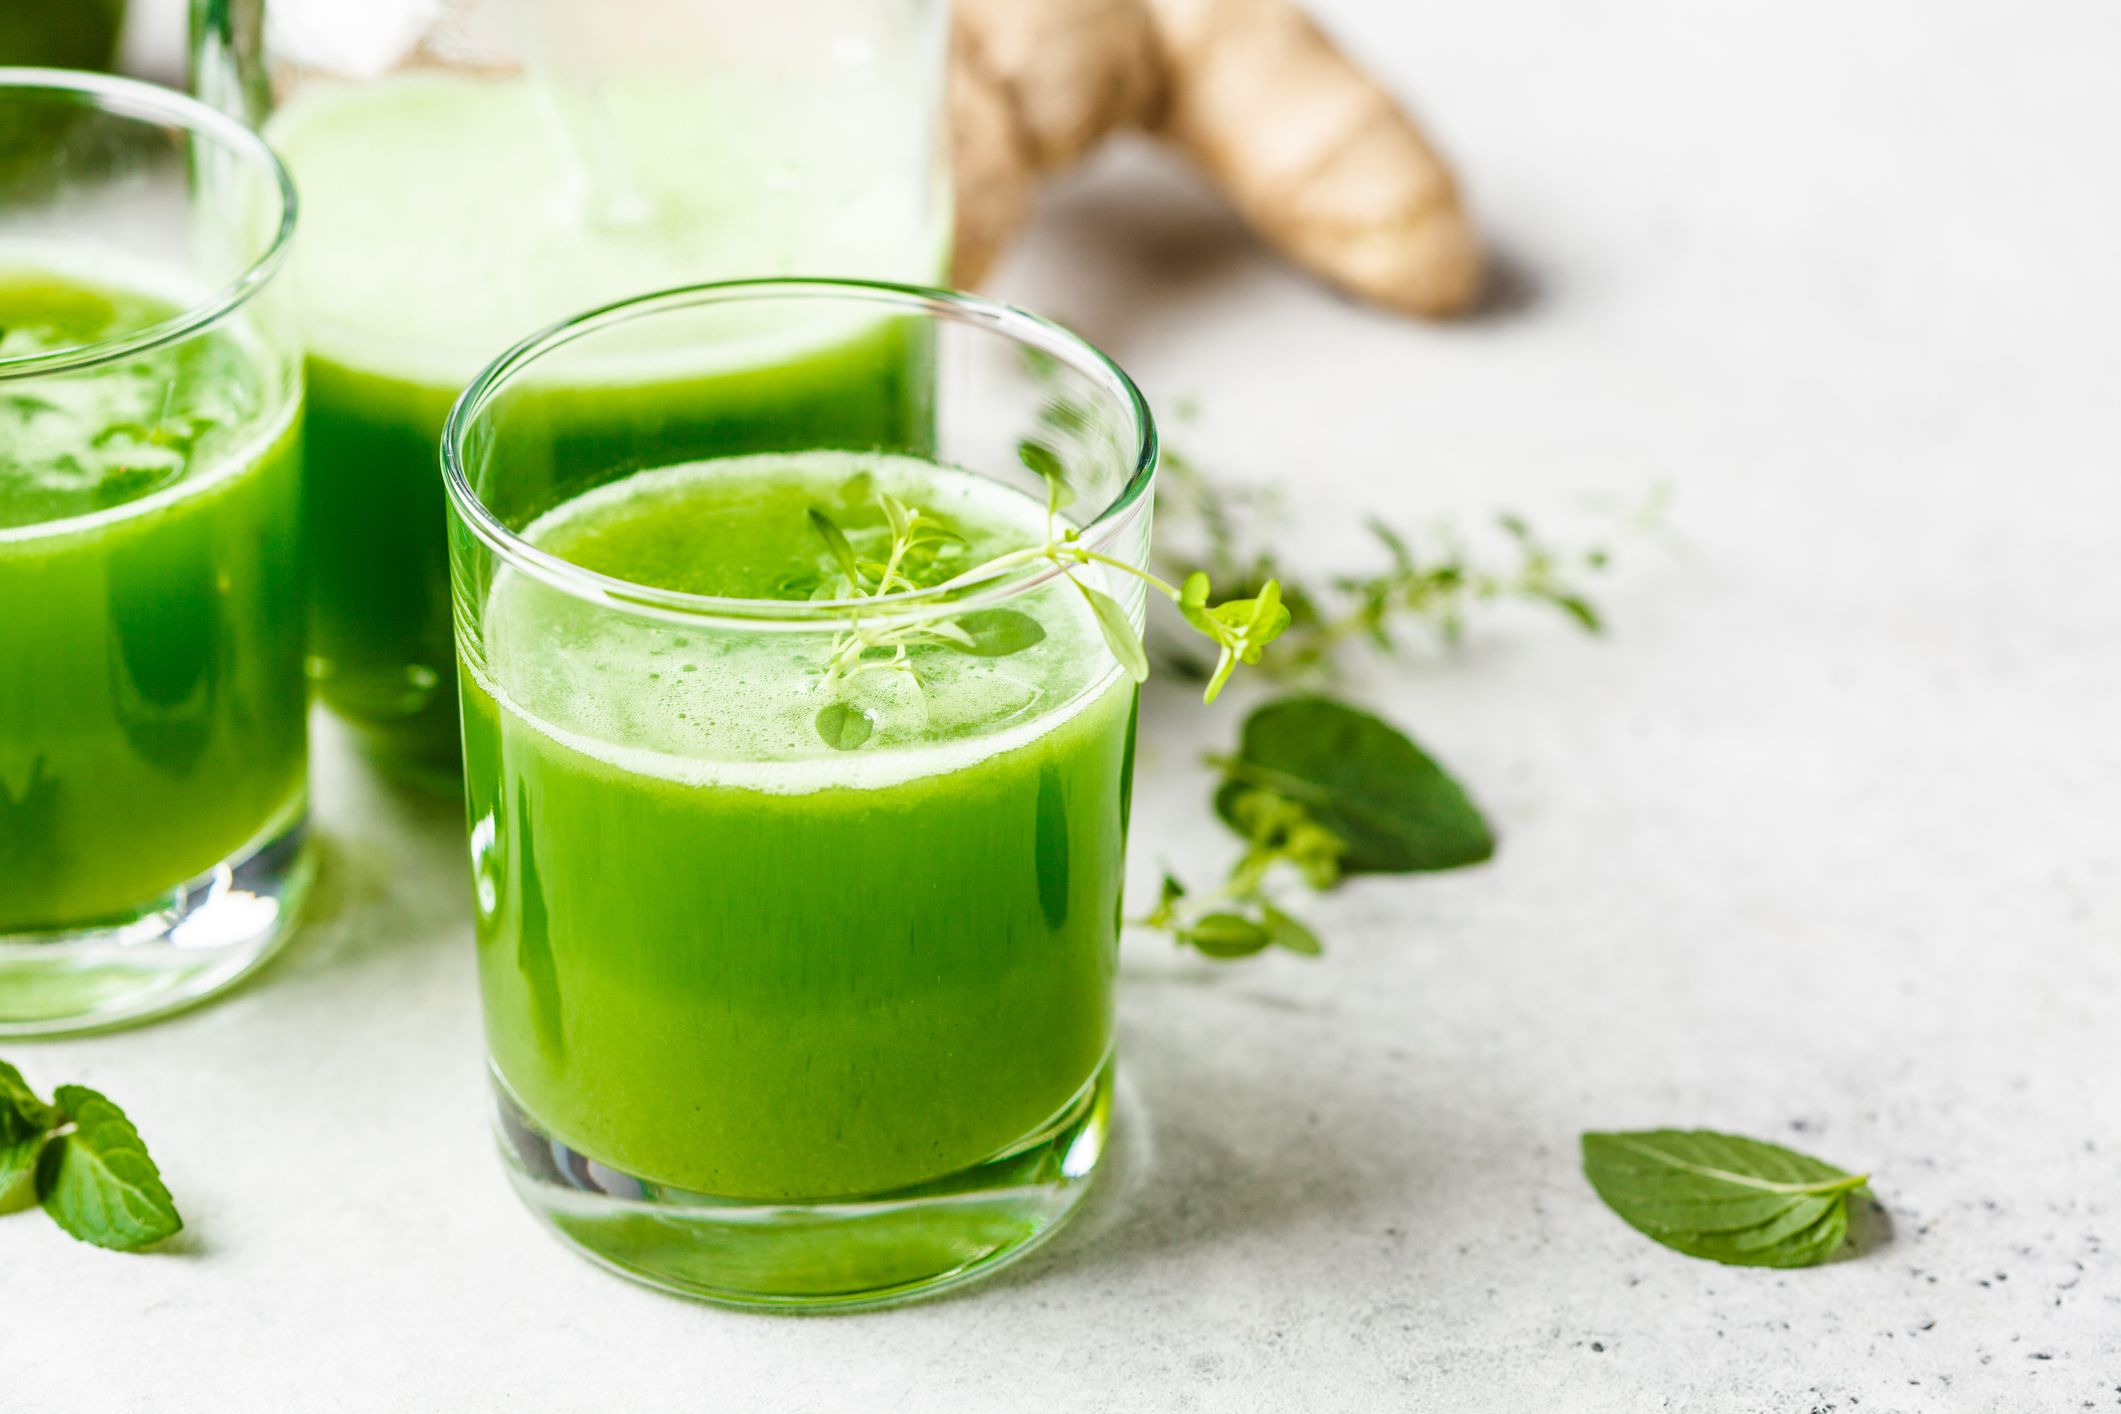 Green Detox Juice With Ginger And Mint In Glasses Royalty Free Image 1590670270 